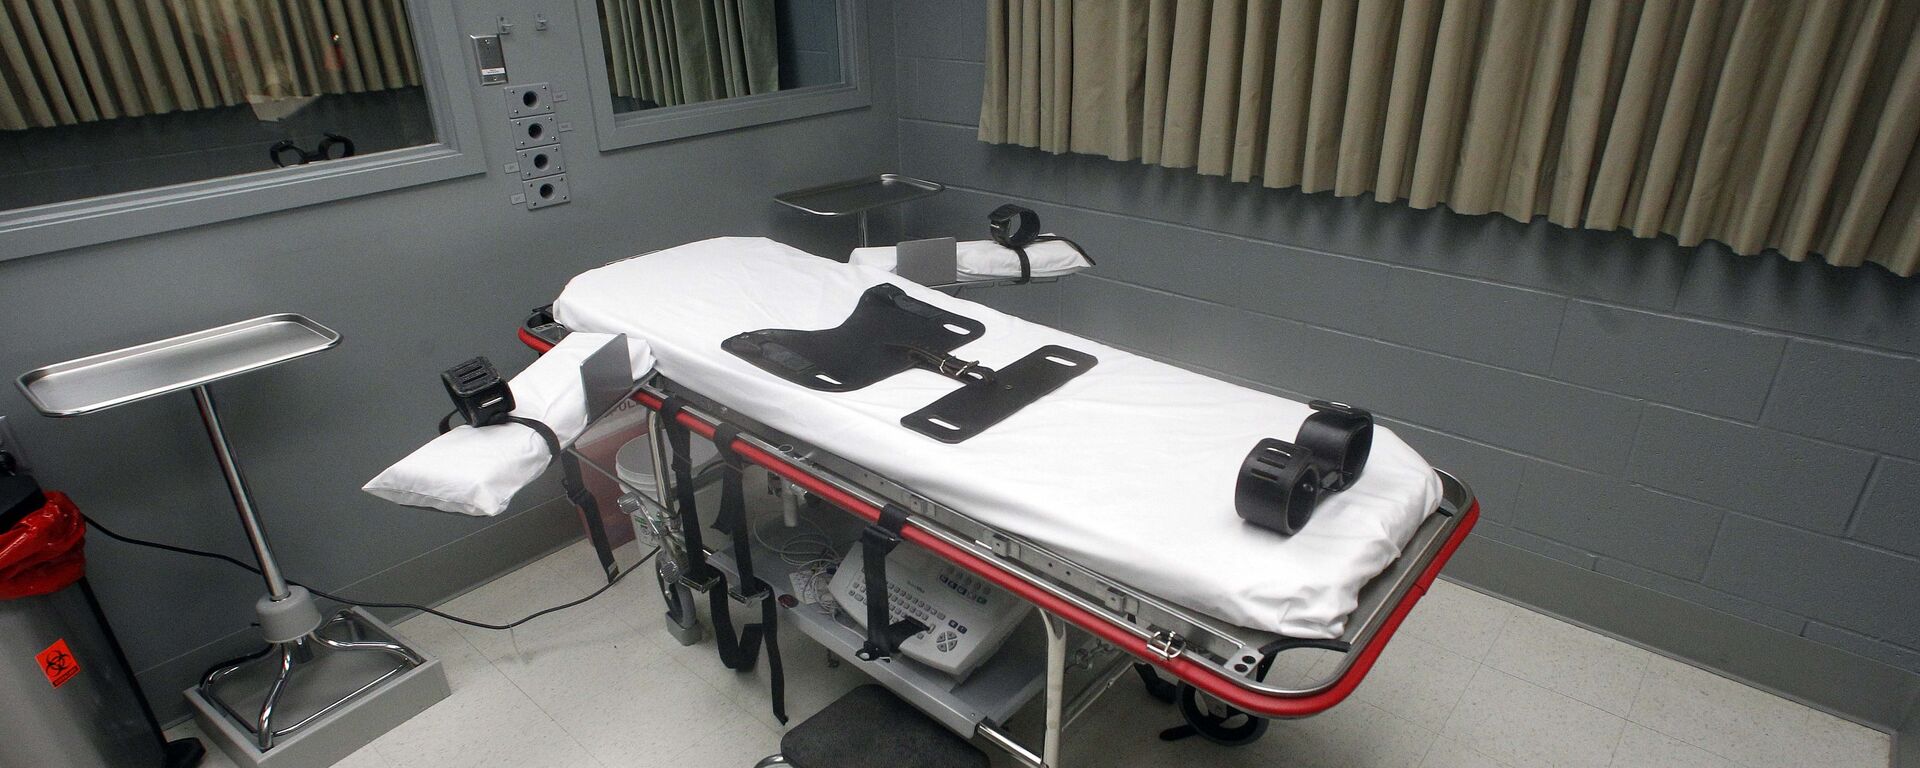 The execution room is shown Friday, Nov. 18, 2011, at the Oregon State Penitentiary, in Salem, Ore - Sputnik International, 1920, 28.01.2022